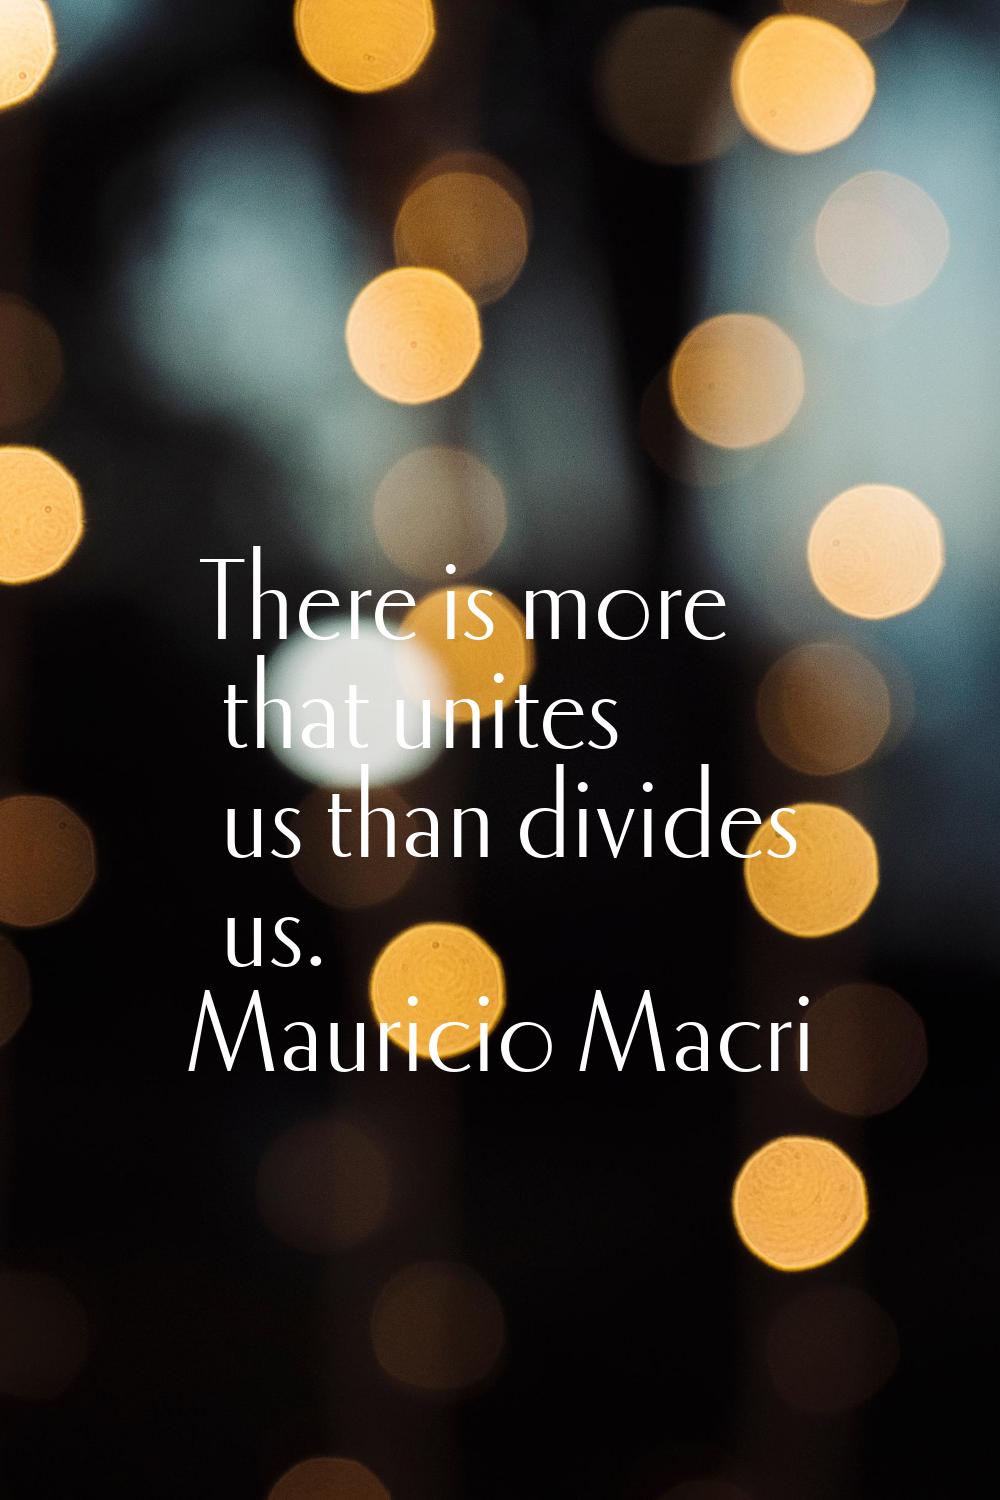 There is more that unites us than divides us.